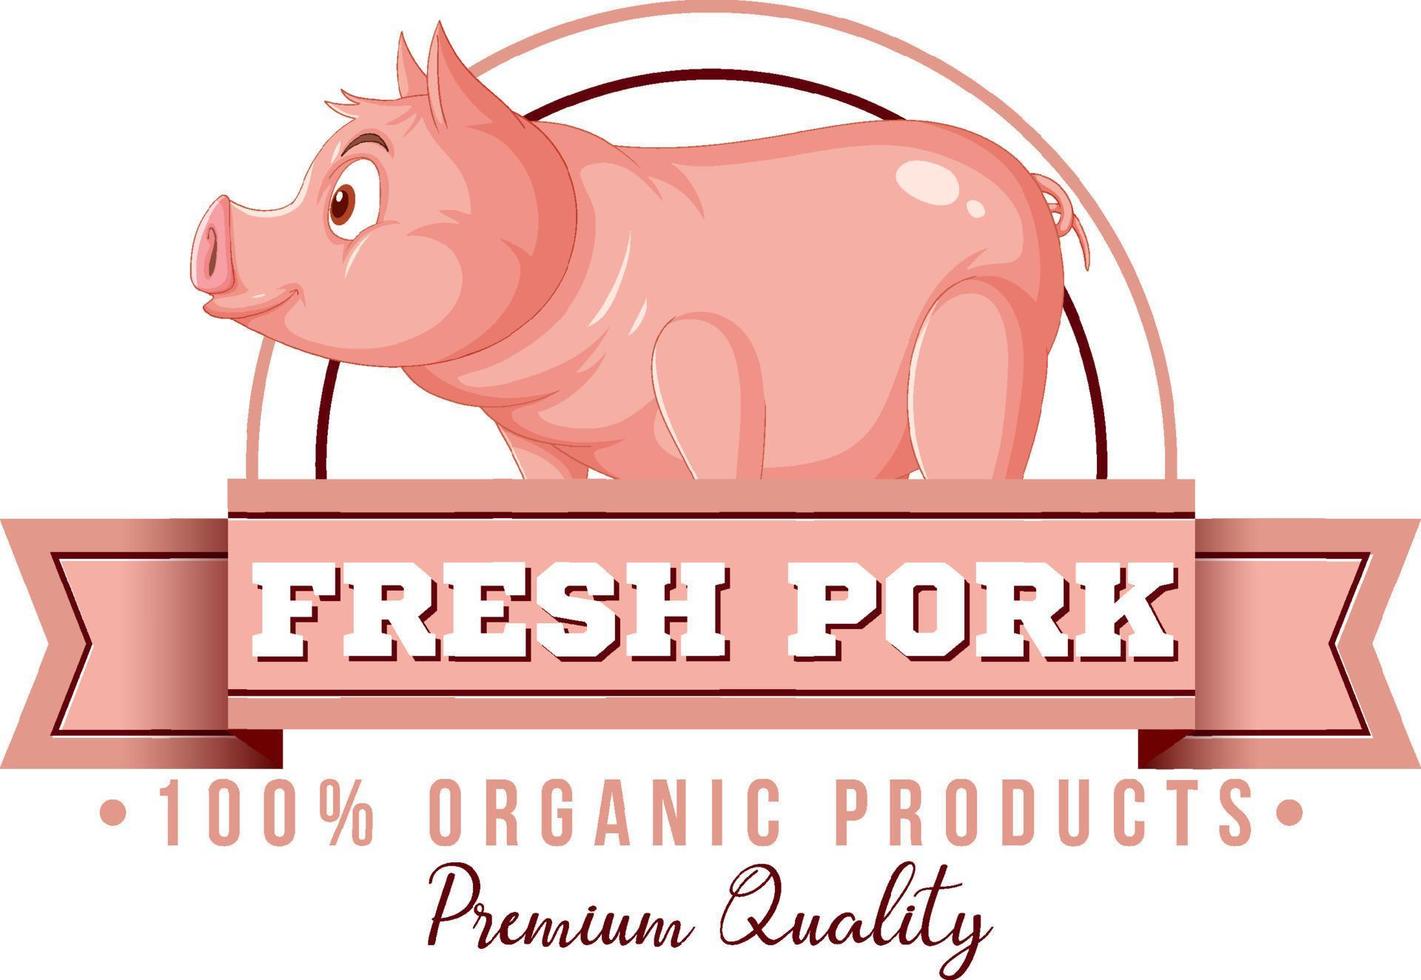 Pig cartoon character logo for pork products vector